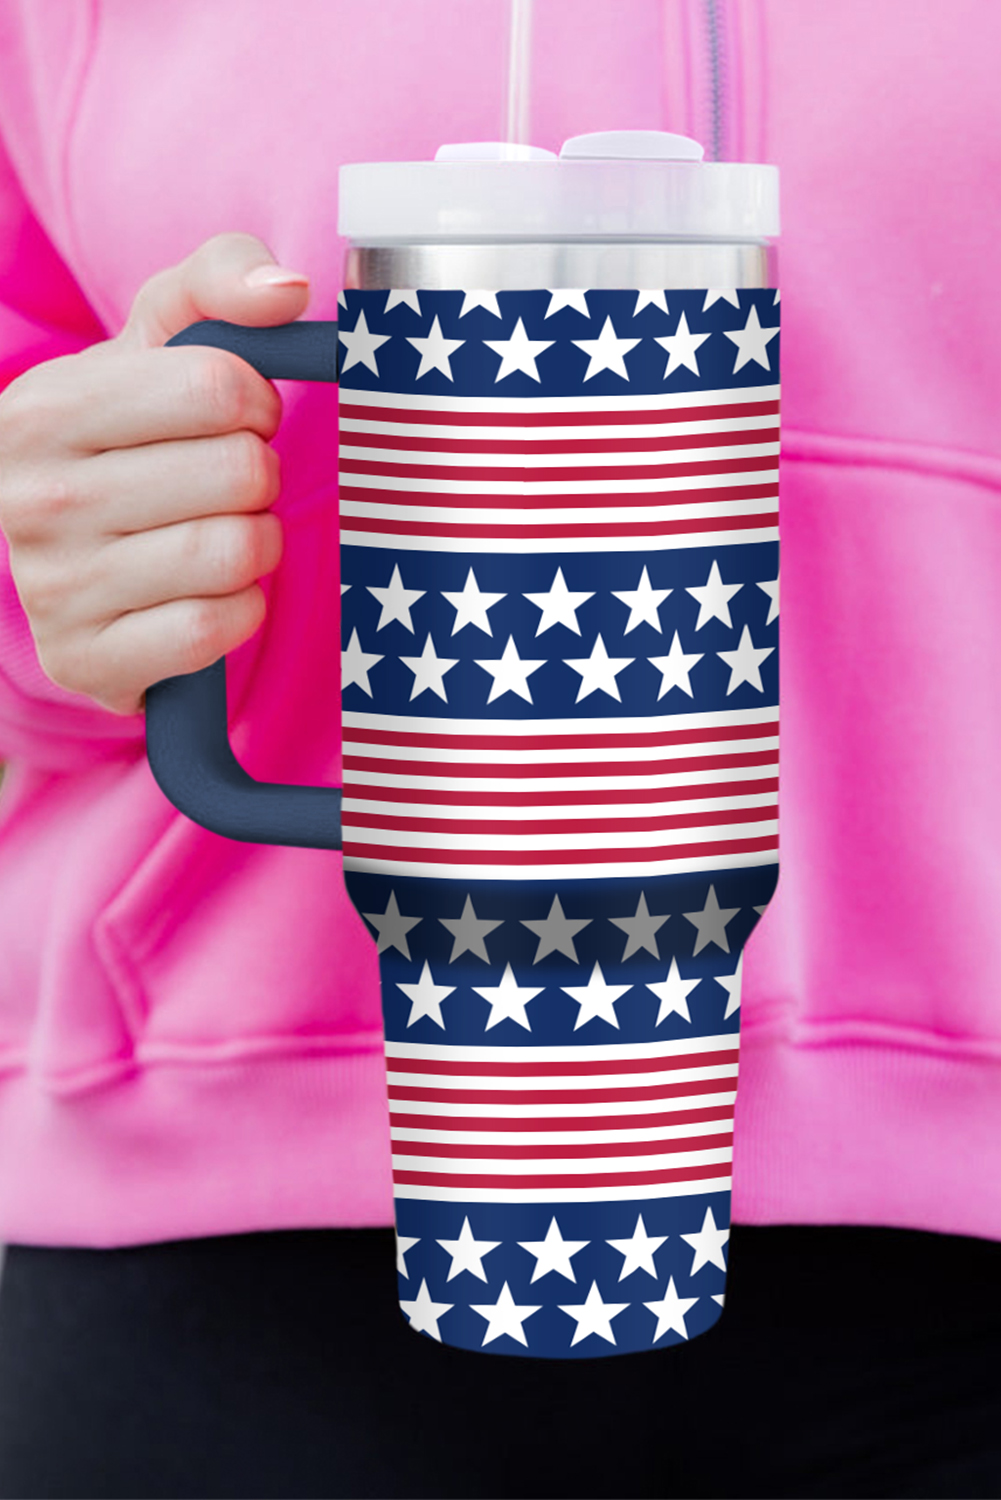 Shewin Wholesale Stores Bluing Stars and Stripes Print Handled Thermos Cup 1200ml